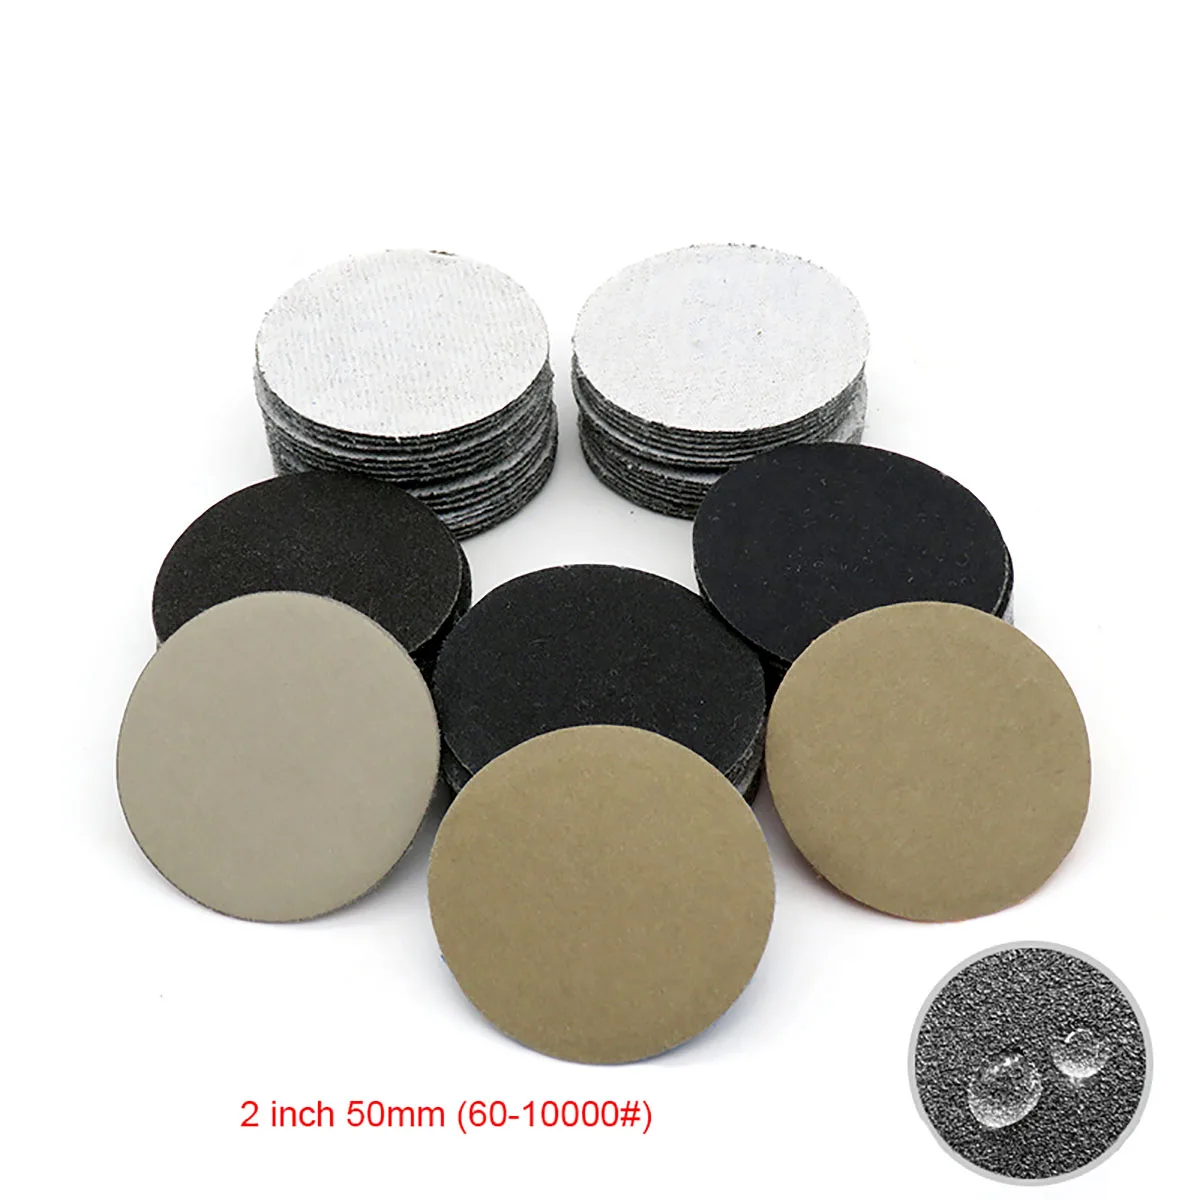 

20pcs 2 Inch 50mm Waterproof Sanding Discs Hook Loop Silicon Carbide Abrasive Sandpaper 60 to 10000 Grit for Wet/Dry Polishing